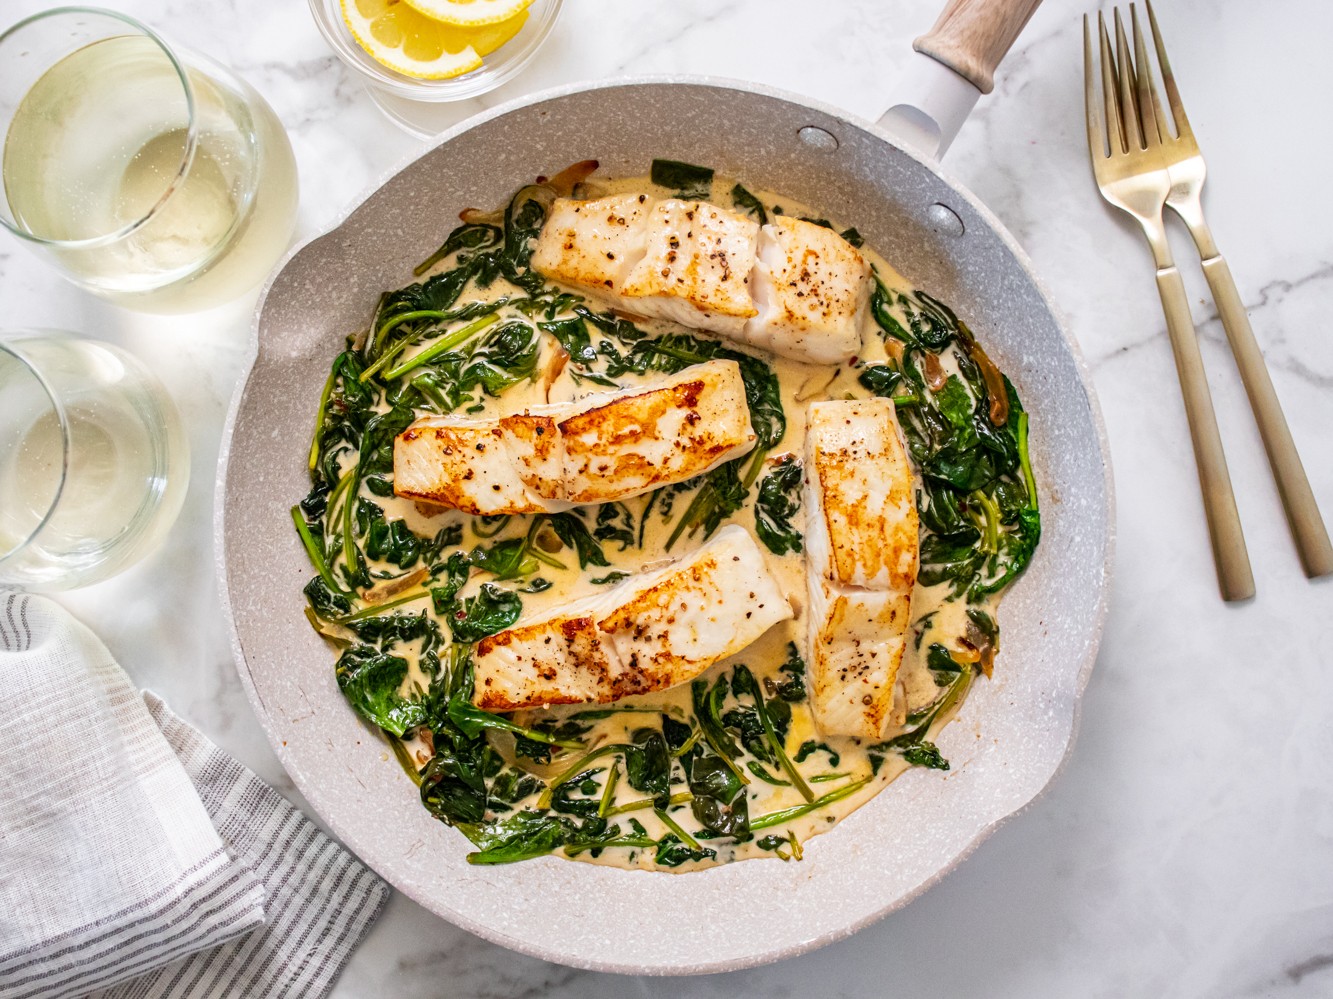 Pan Fried Fish With Creamed Spinach, Recipe